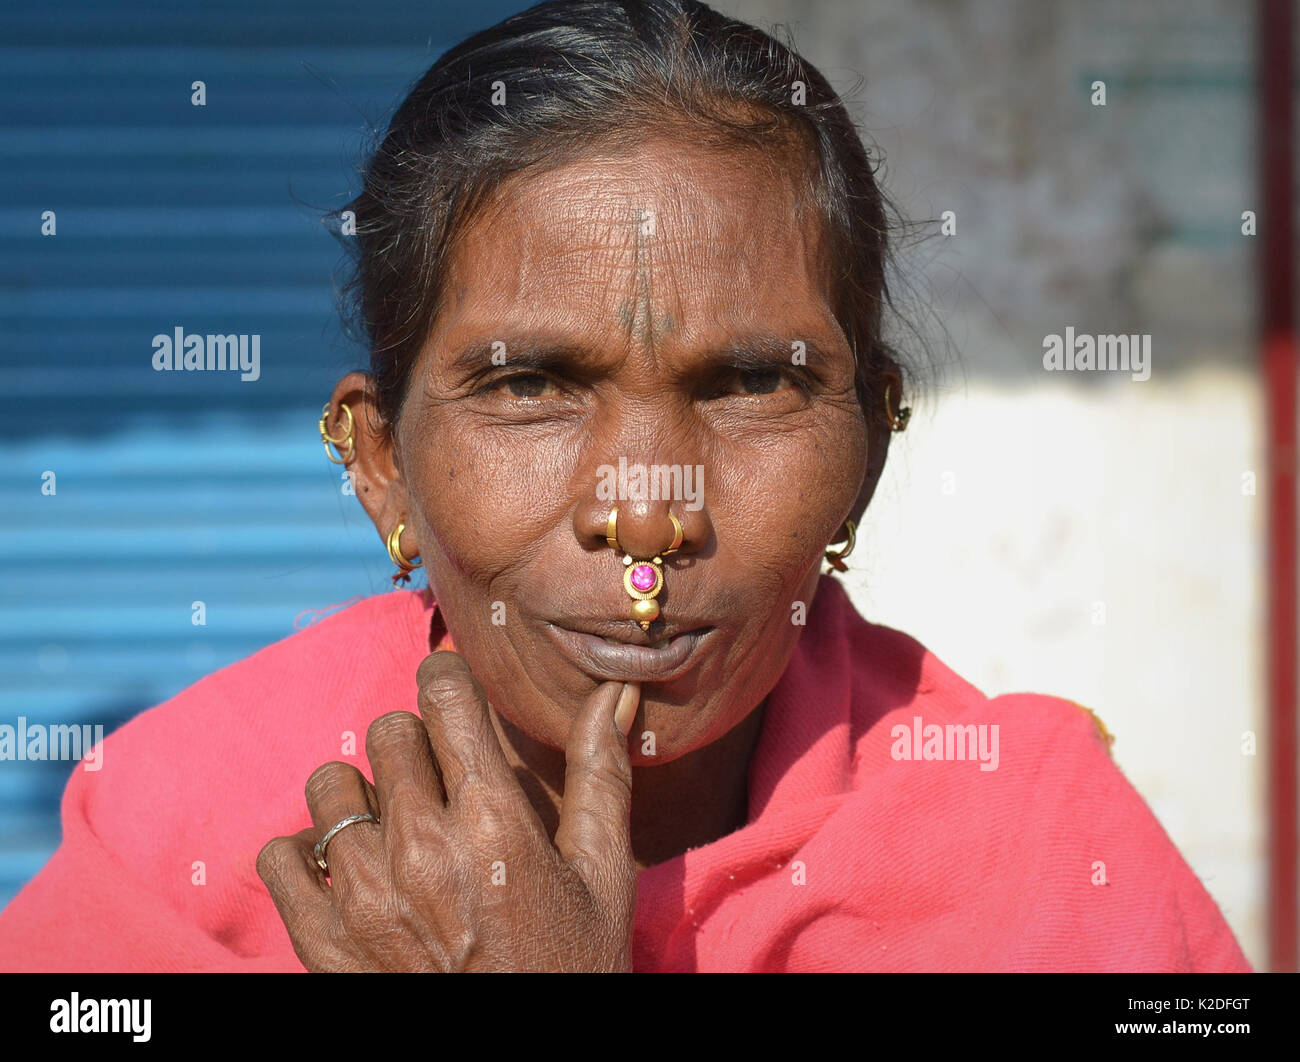 Elderly Indian Adivasi woman (Desia Kondh tribe, Kuvi Kondh tribe) with gold-and-gemstone nose jewellery and tribal earrings smiles for the camera. Stock Photo